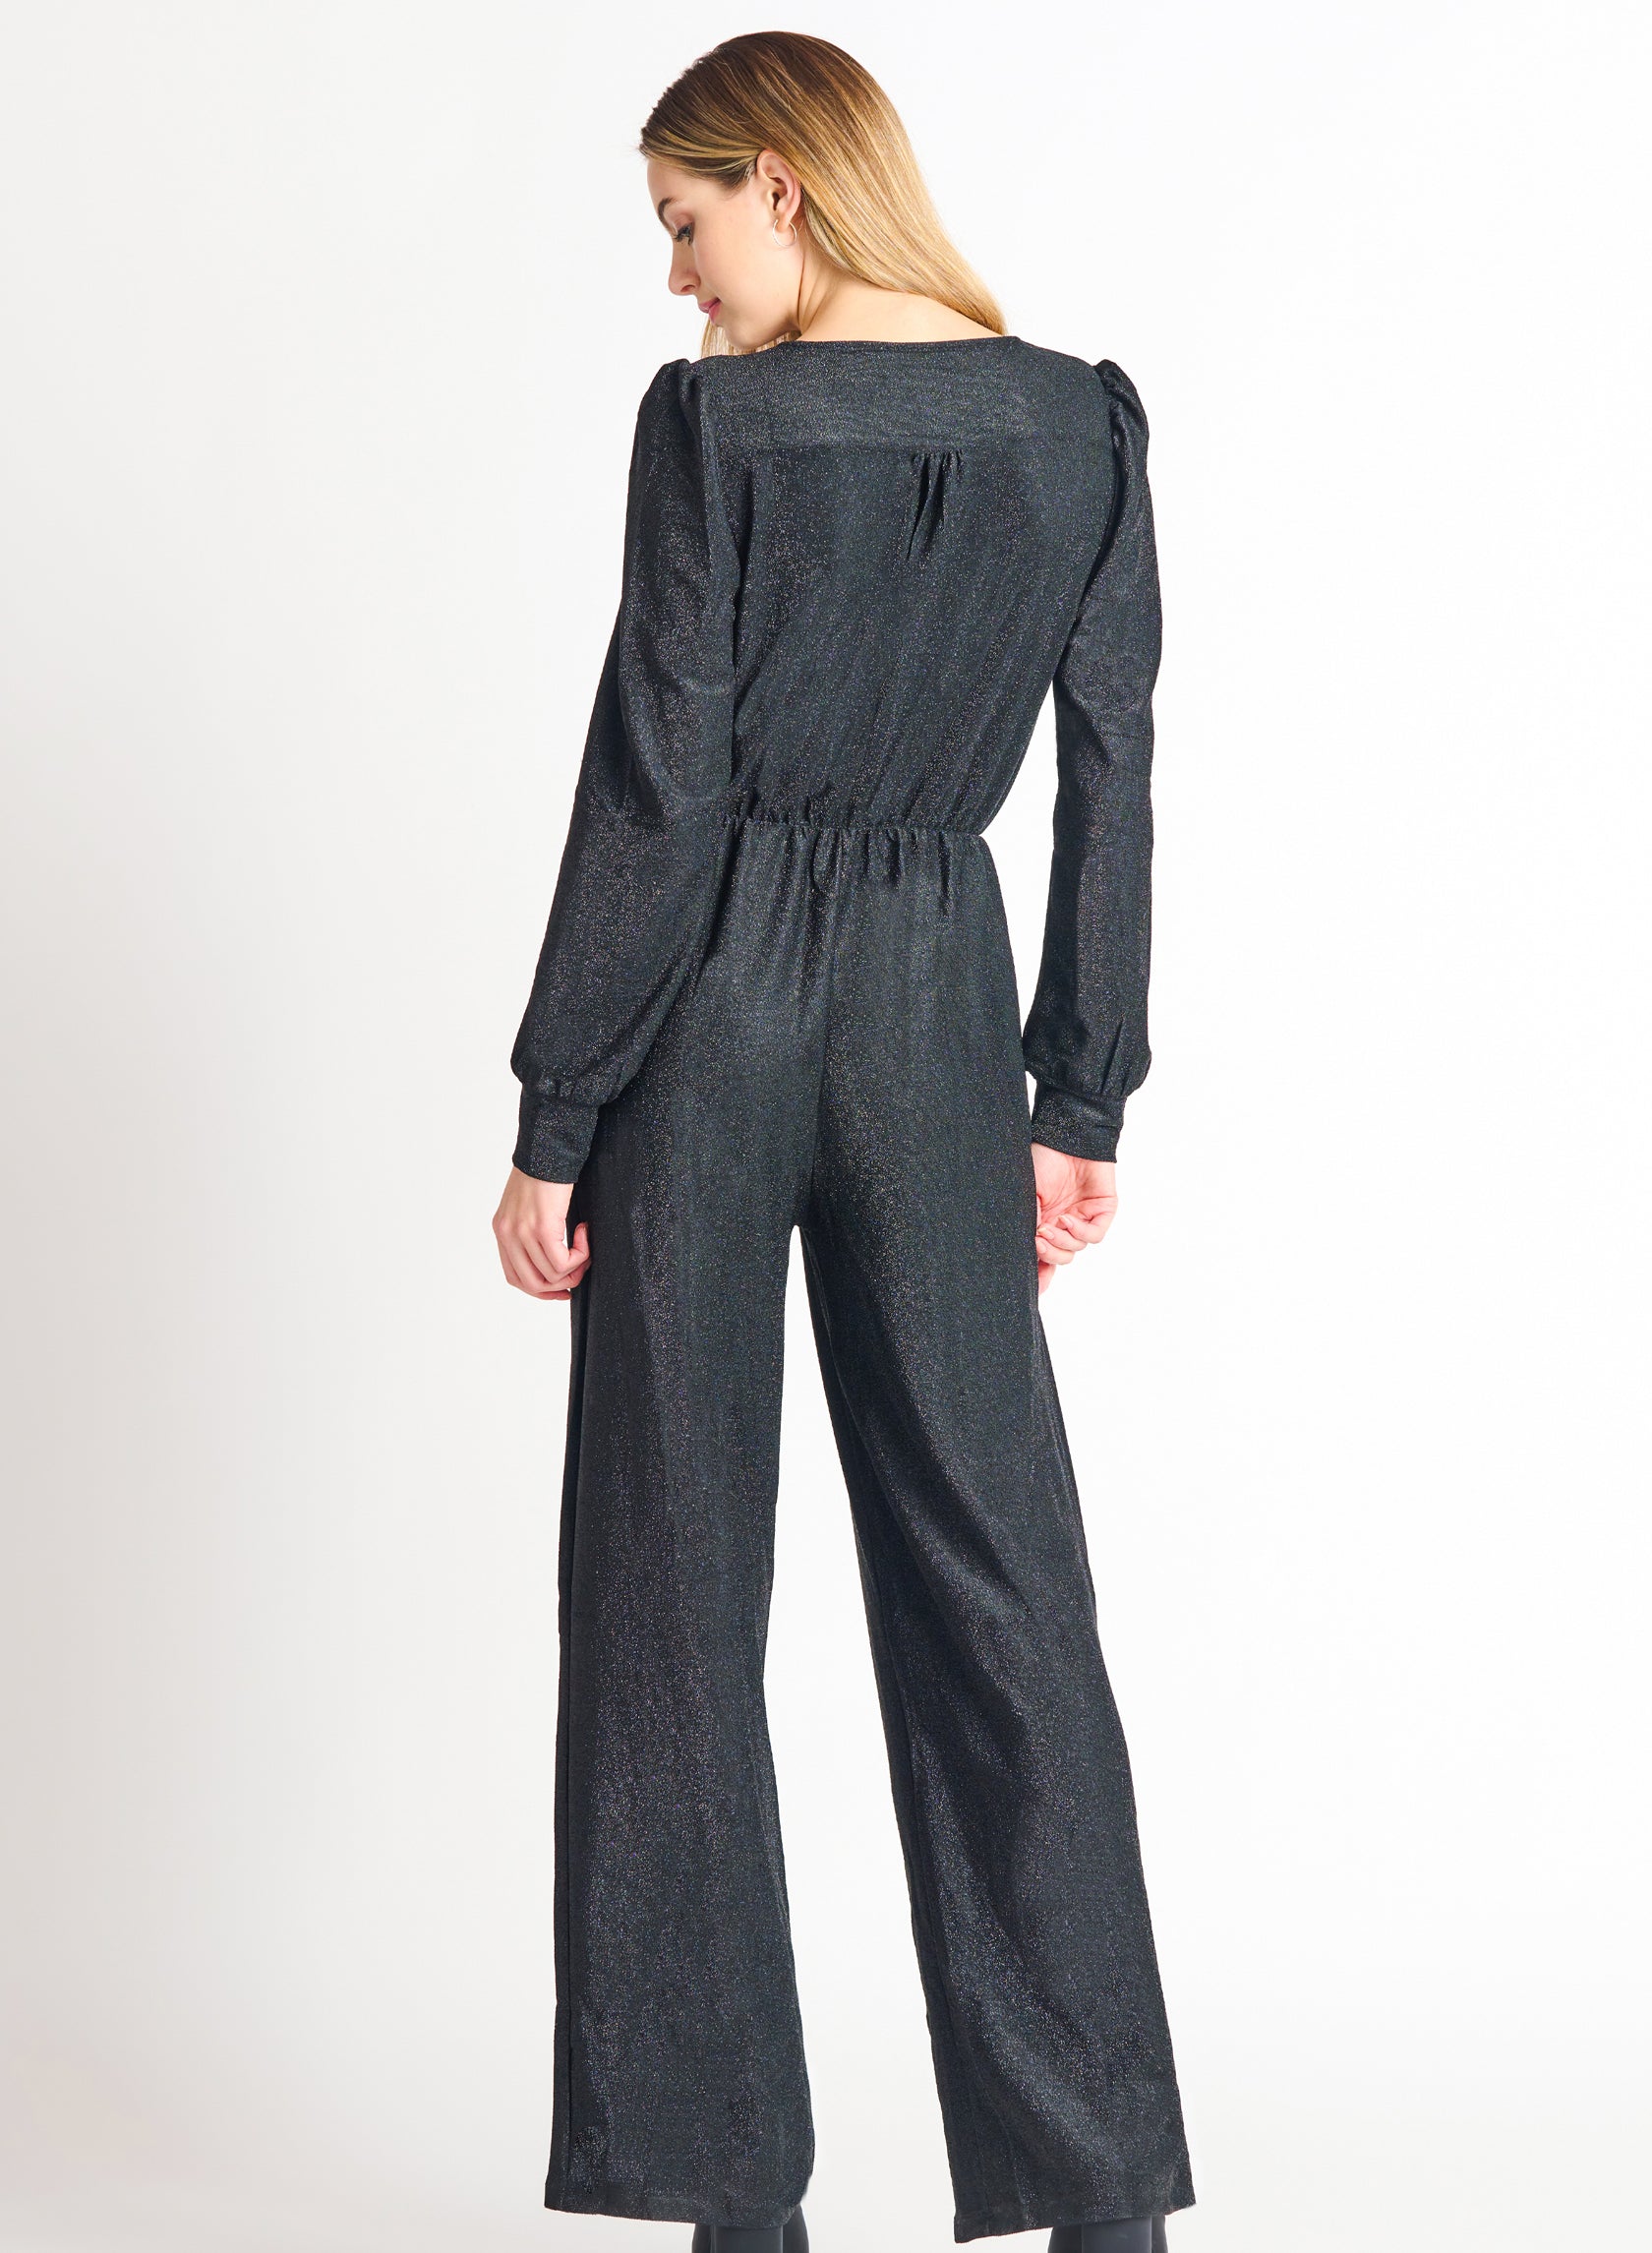 All Eyes On Me Black Jumpsuit-Jumpsuits-Vixen Collection, Day Spa and Women's Boutique Located in Seattle, Washington